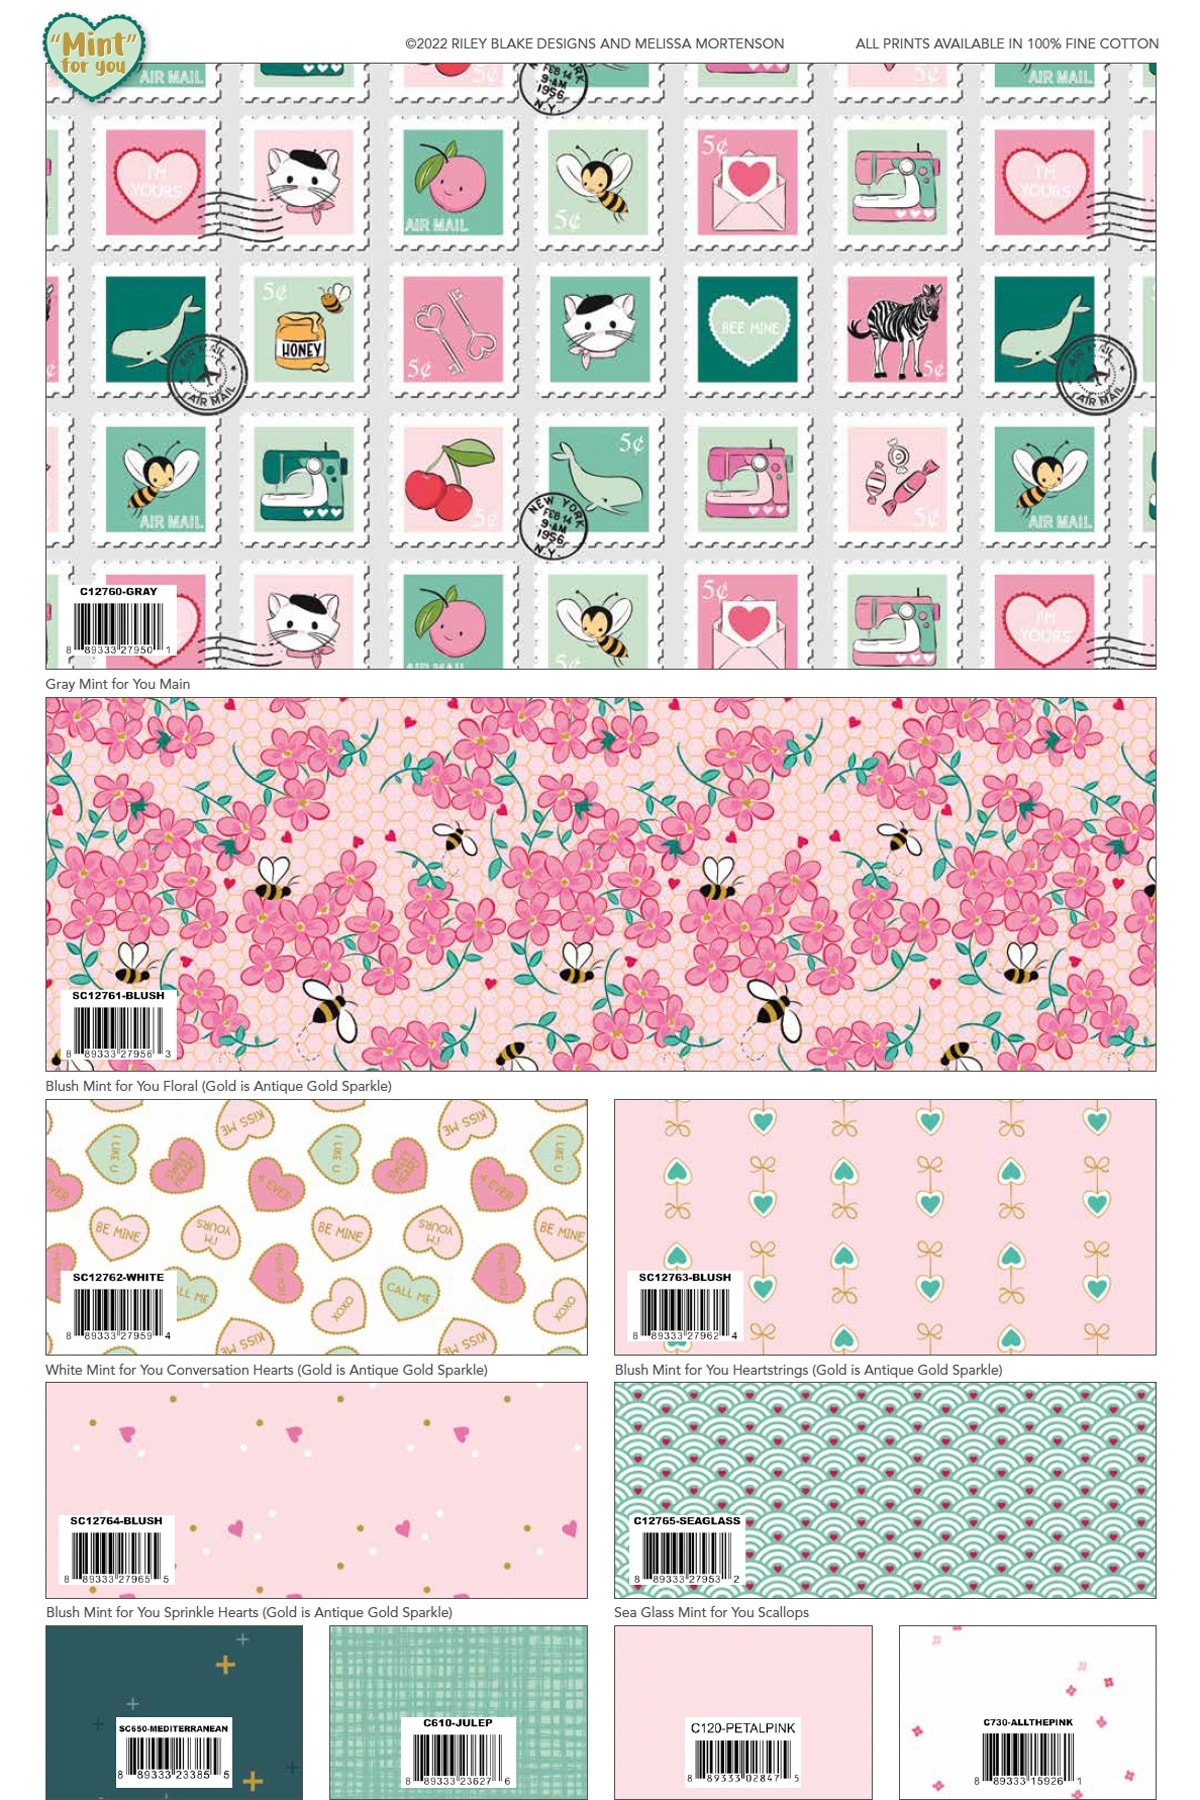 grid showing a variety of fabric prints in pink, mint and red